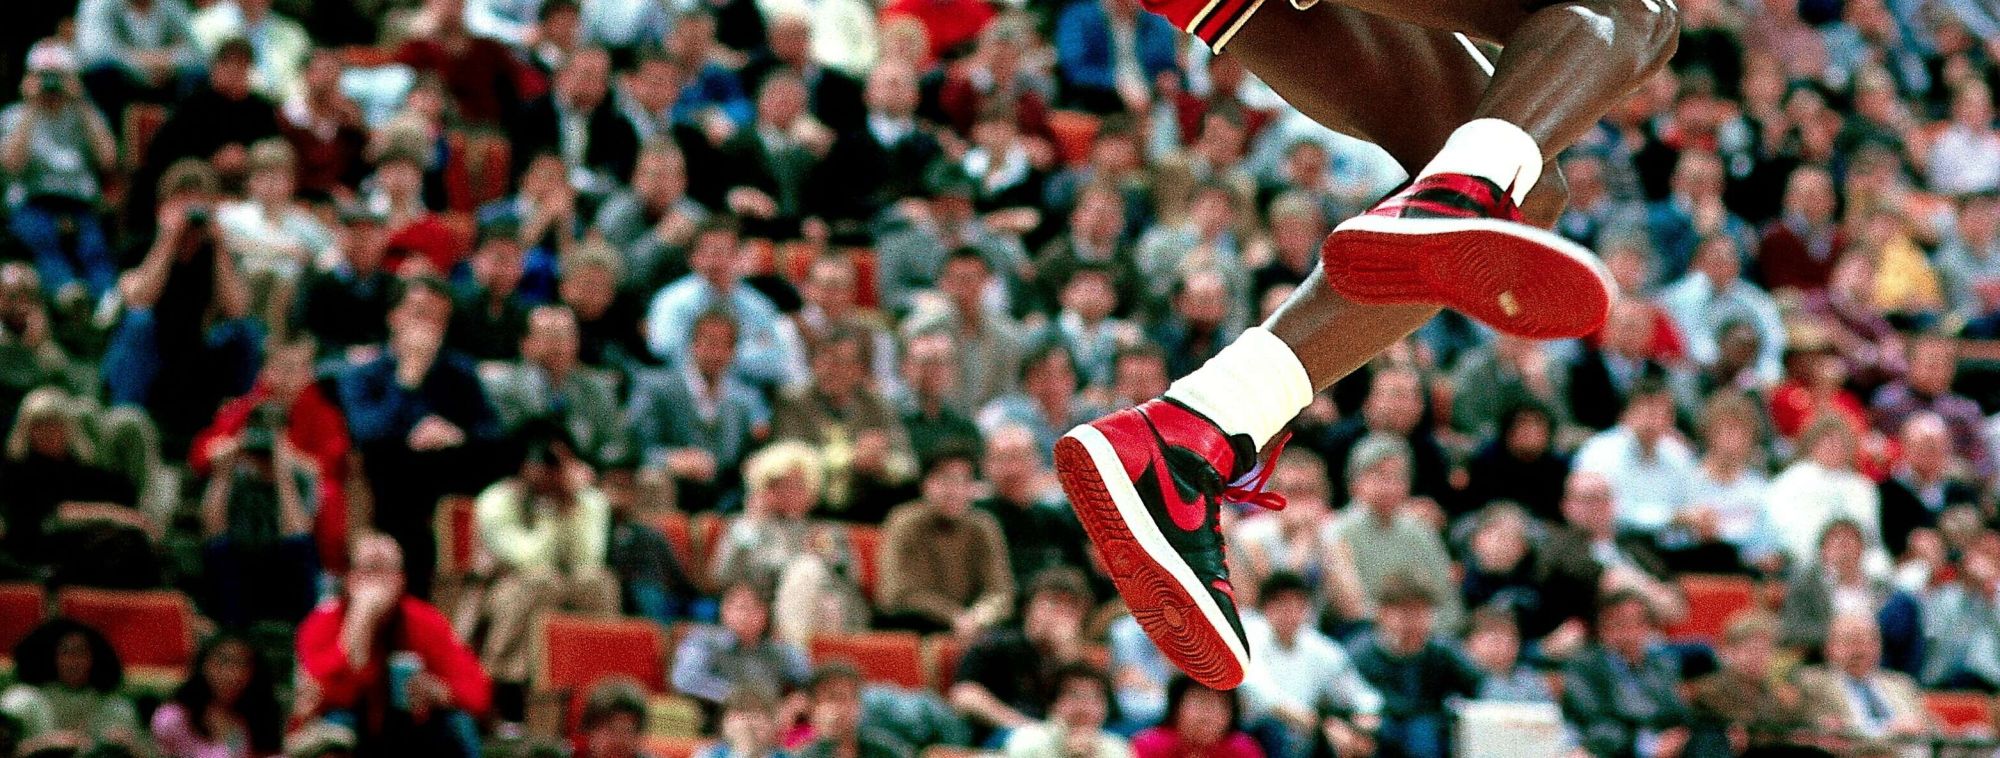 Remembering Jordan and the 1984 Olympic trials